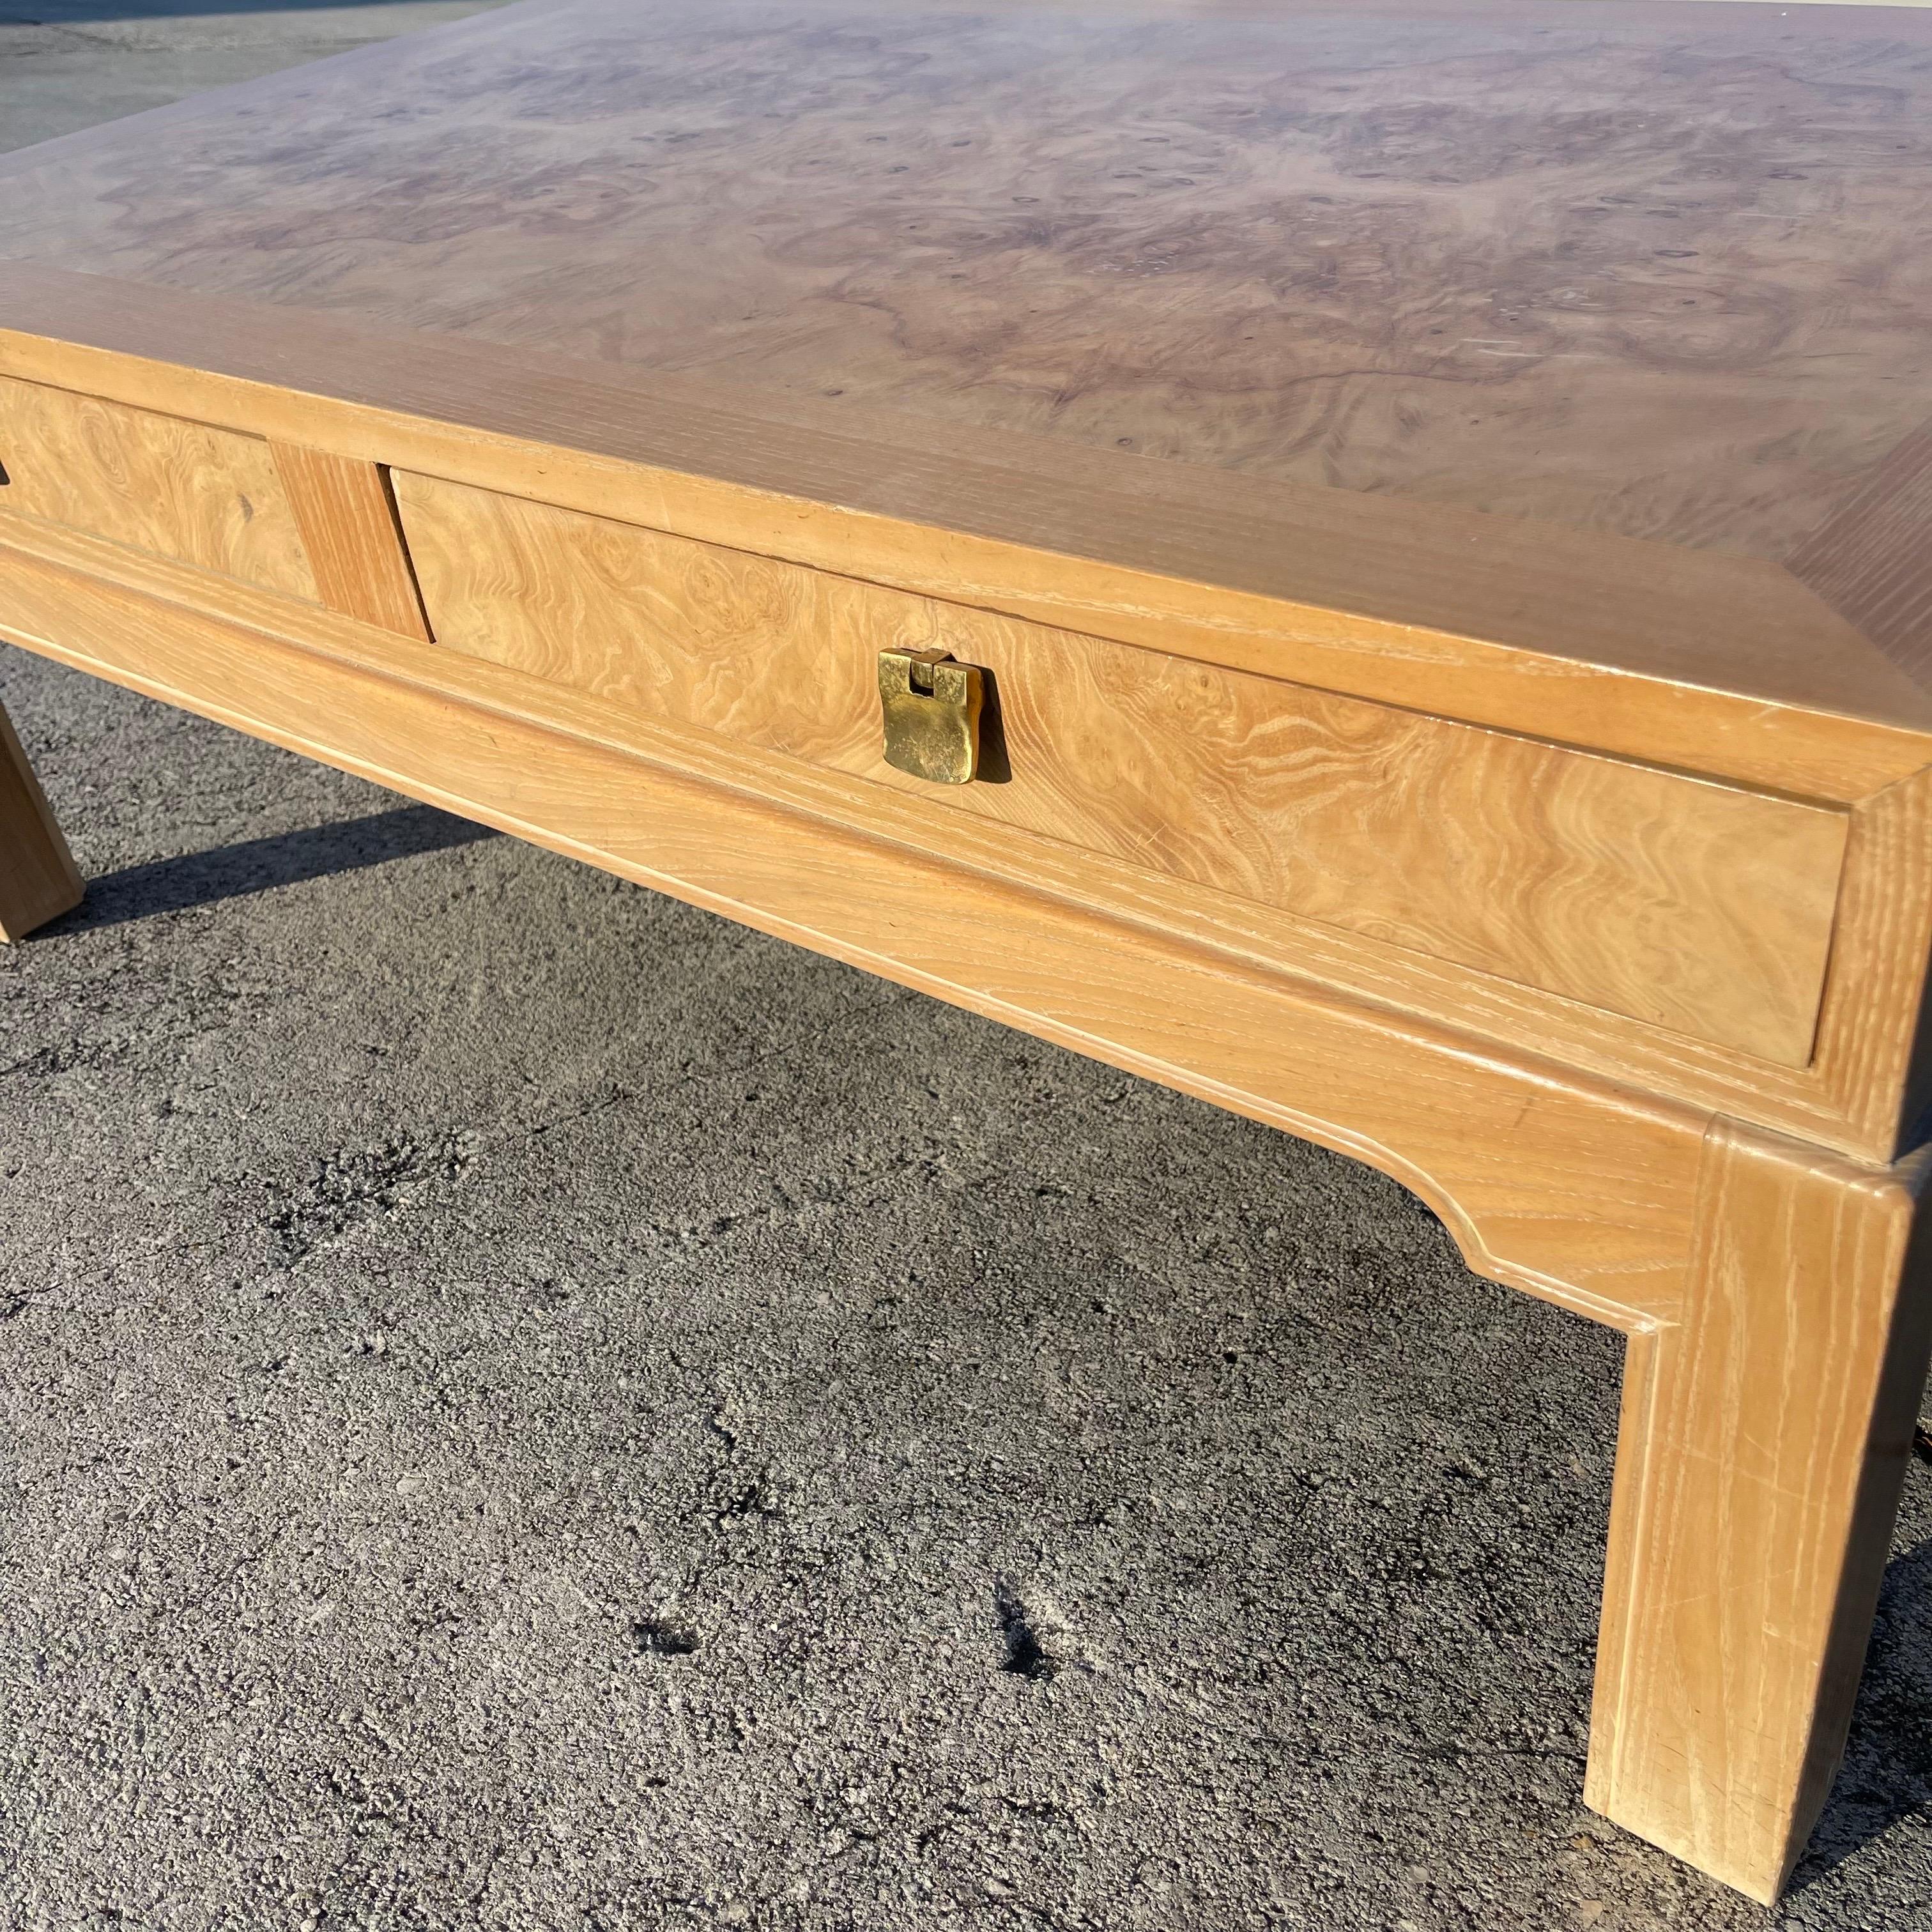 Drexel Heritage “Corinthian” Collection Burl Wood Coffee Table w/Drawers In Good Condition For Sale In Jensen Beach, FL